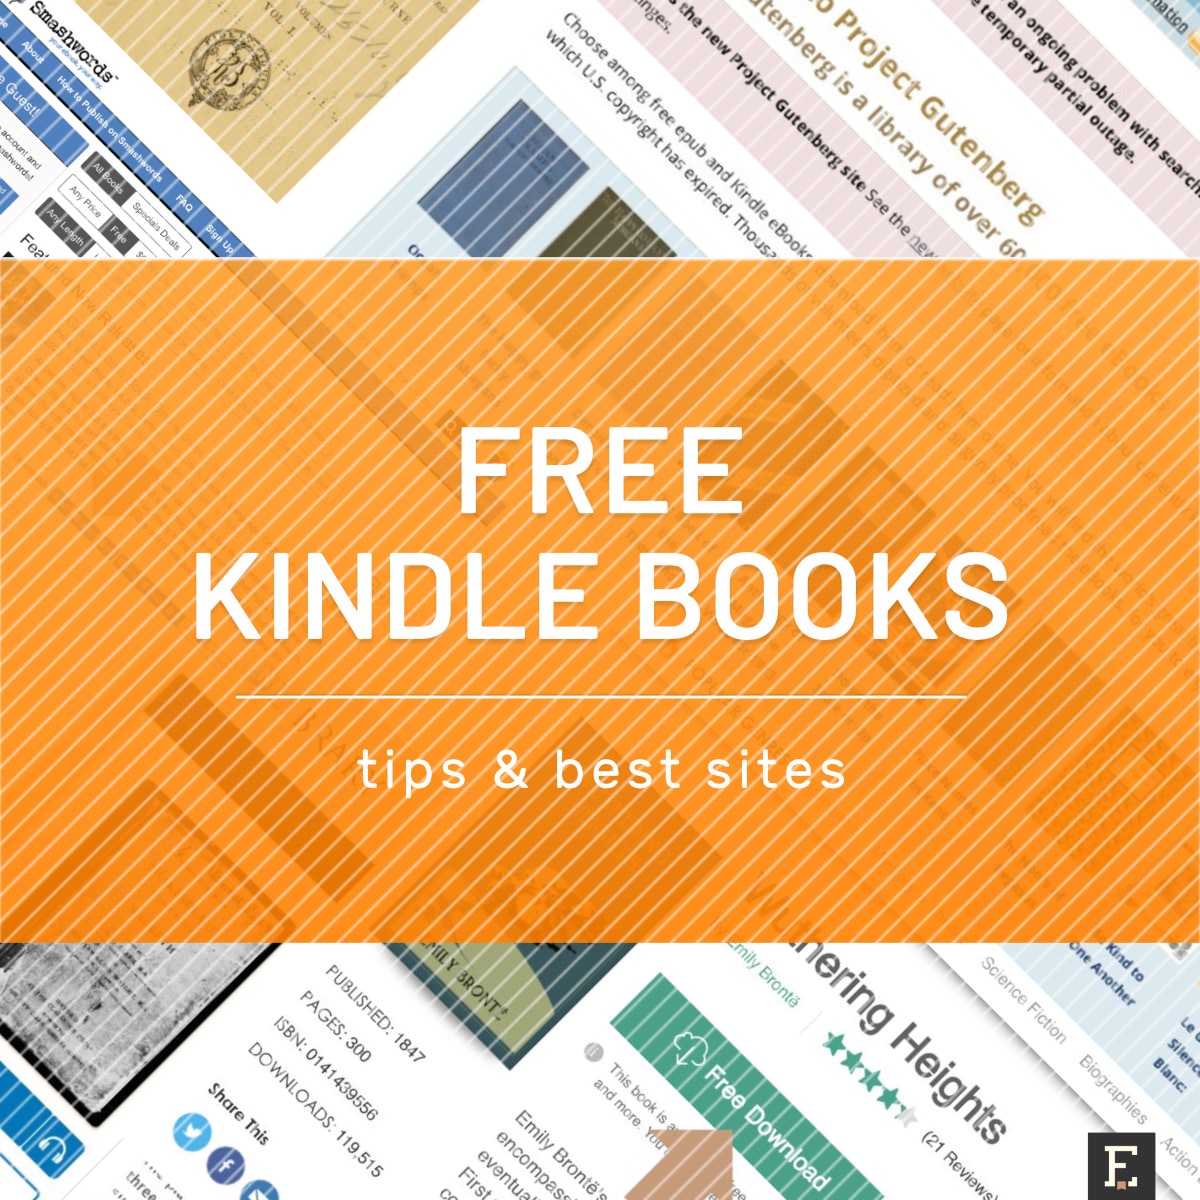 How to Convert Ebooks to Work With Your Kindle for Free